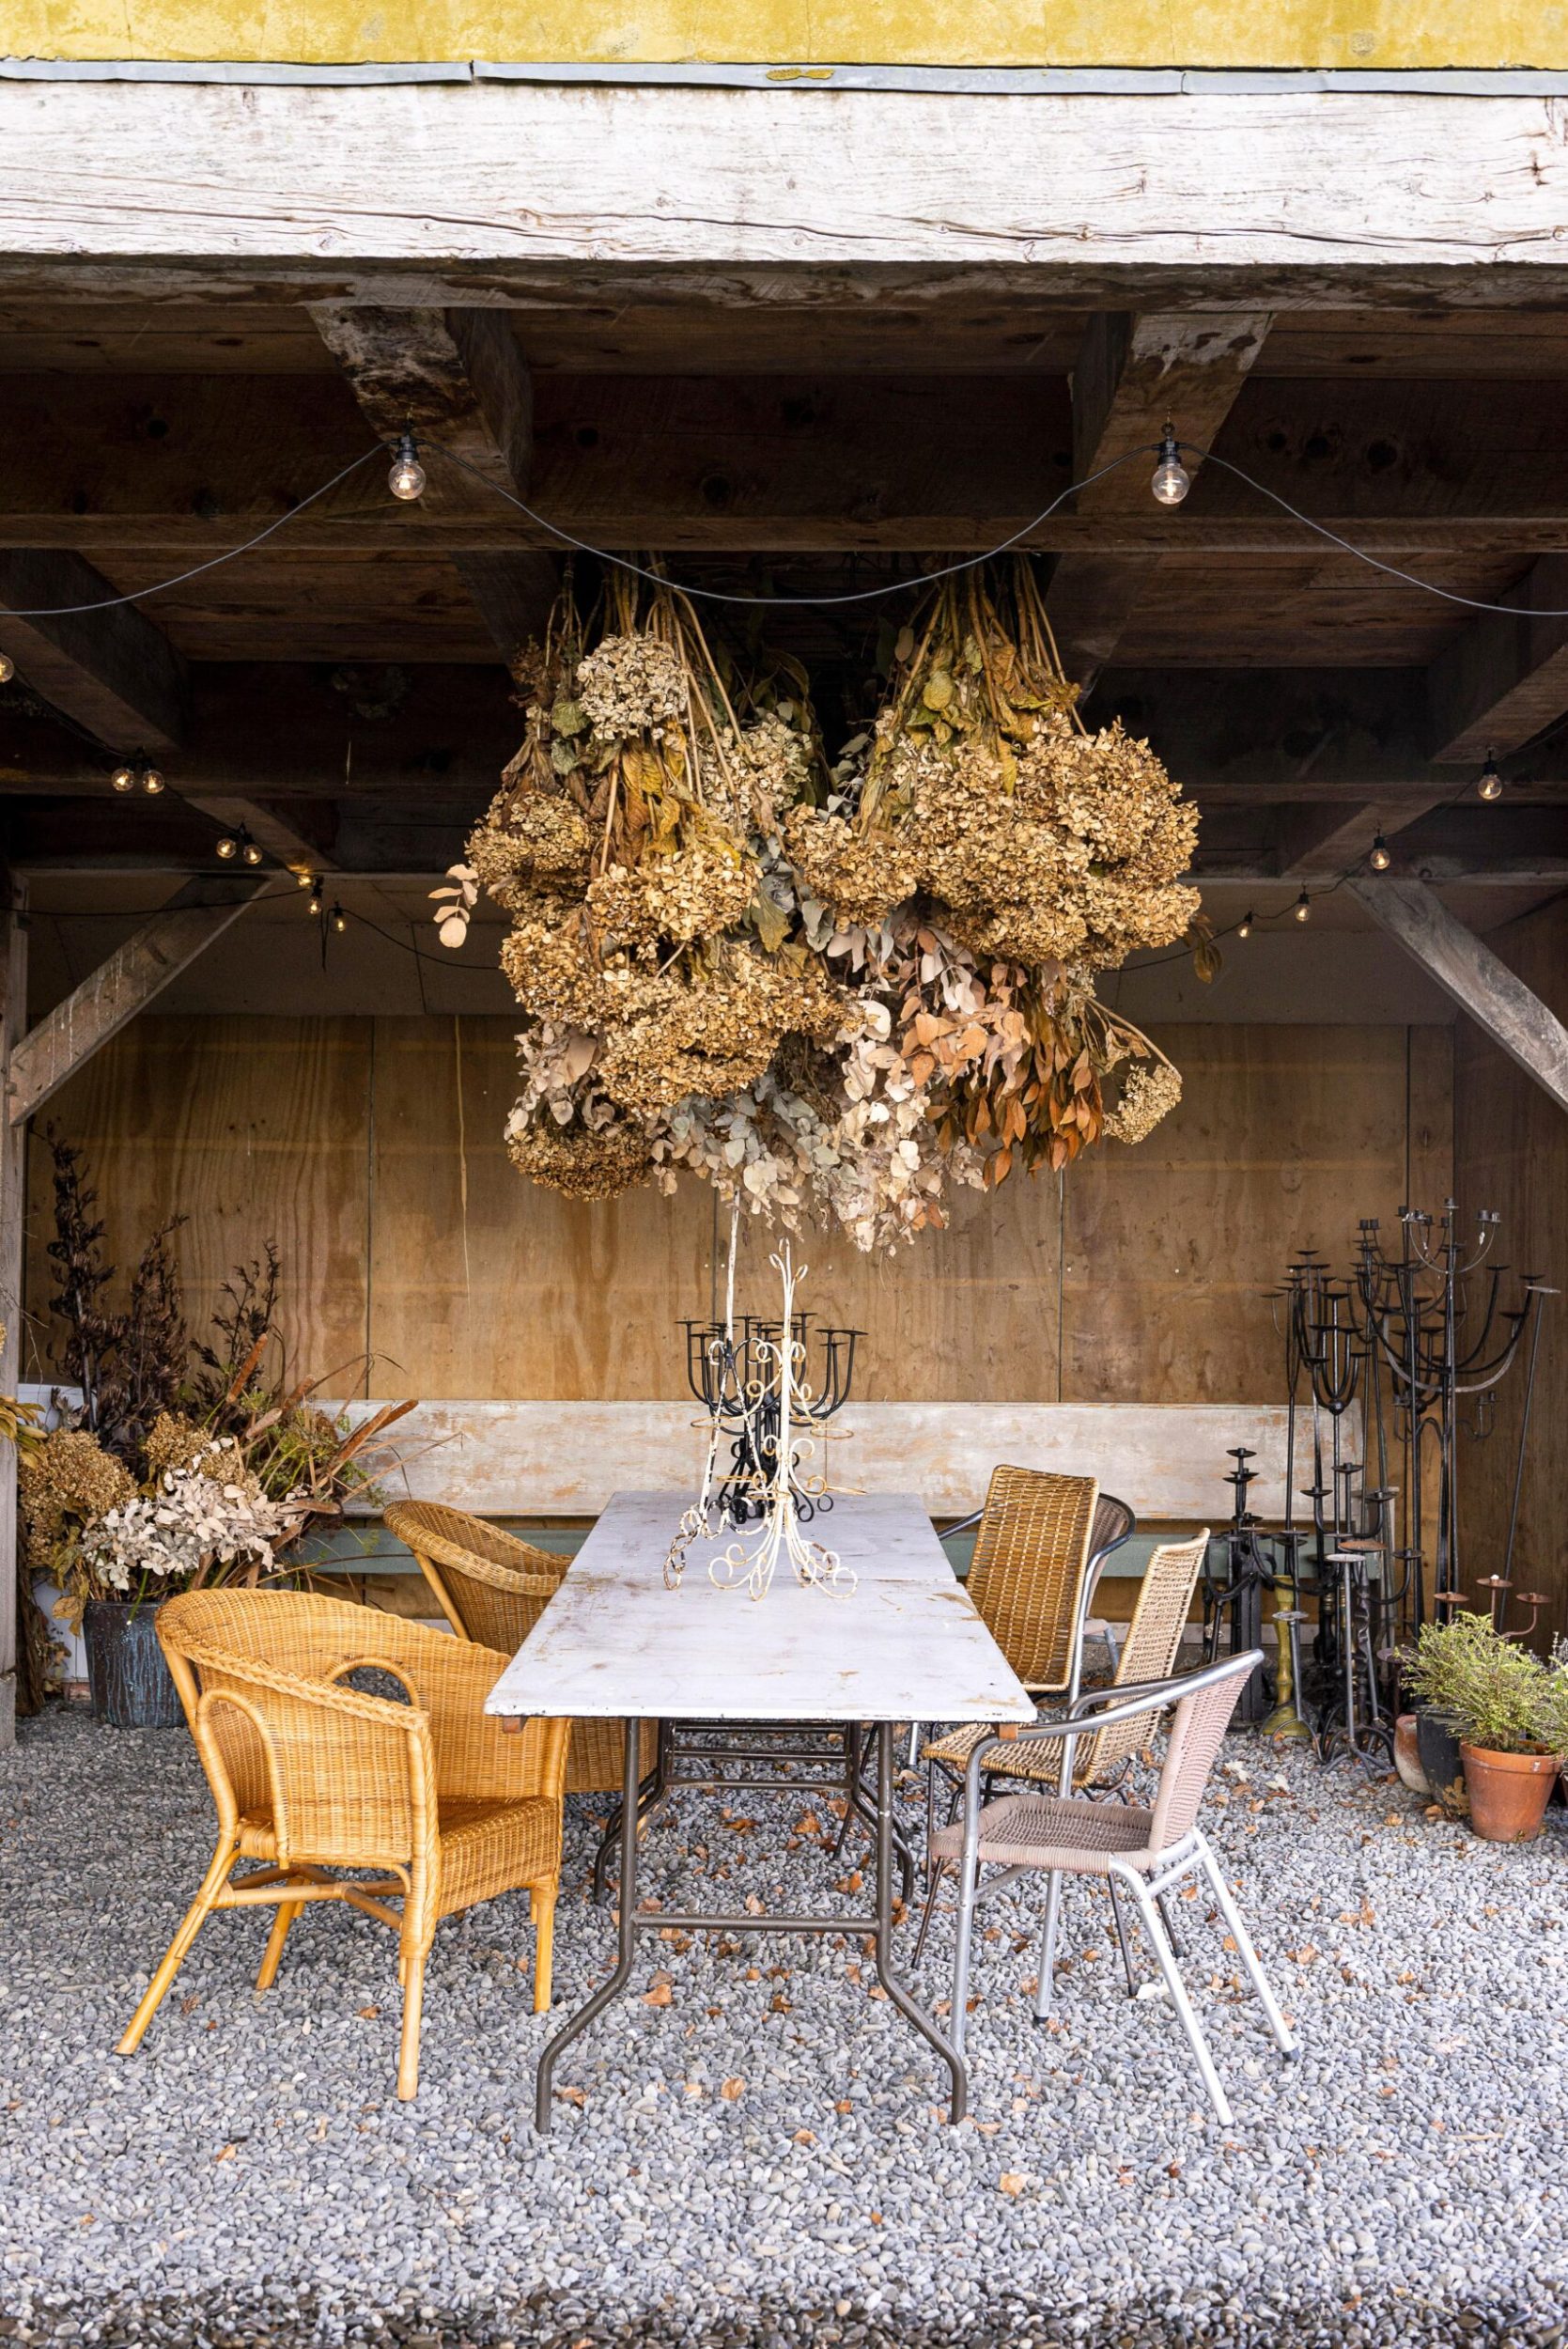 A rustic outdoor pavilion with a grey rock floor, marble dining table and large dried floral hanging arrangement